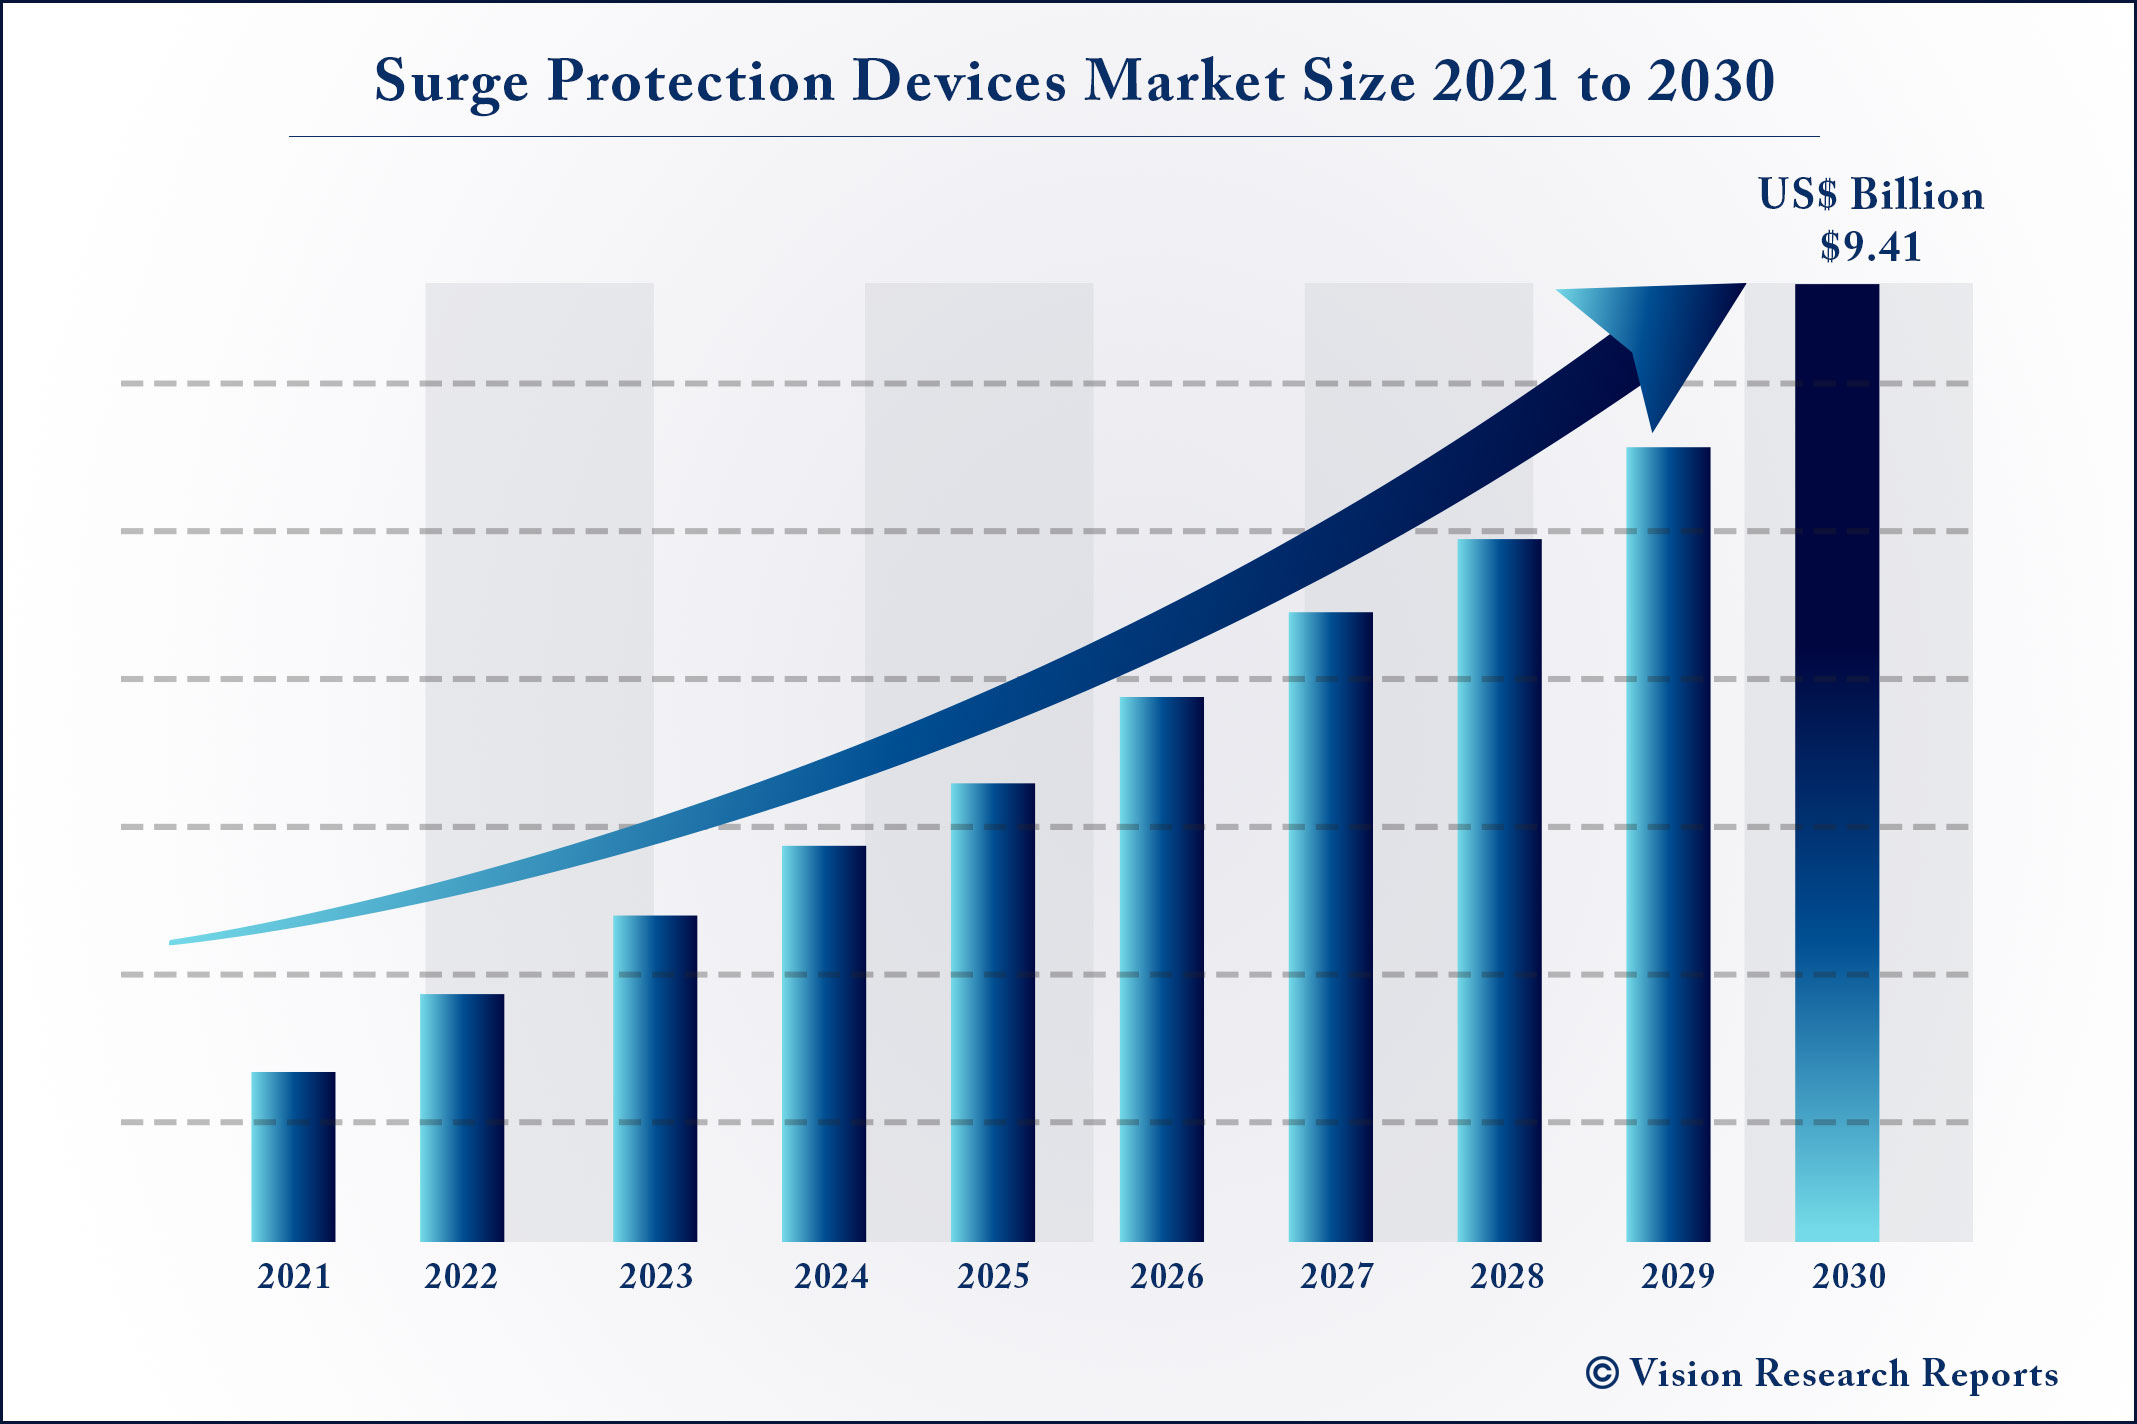 Surge Protection Devices Market Size 2021 to 2030